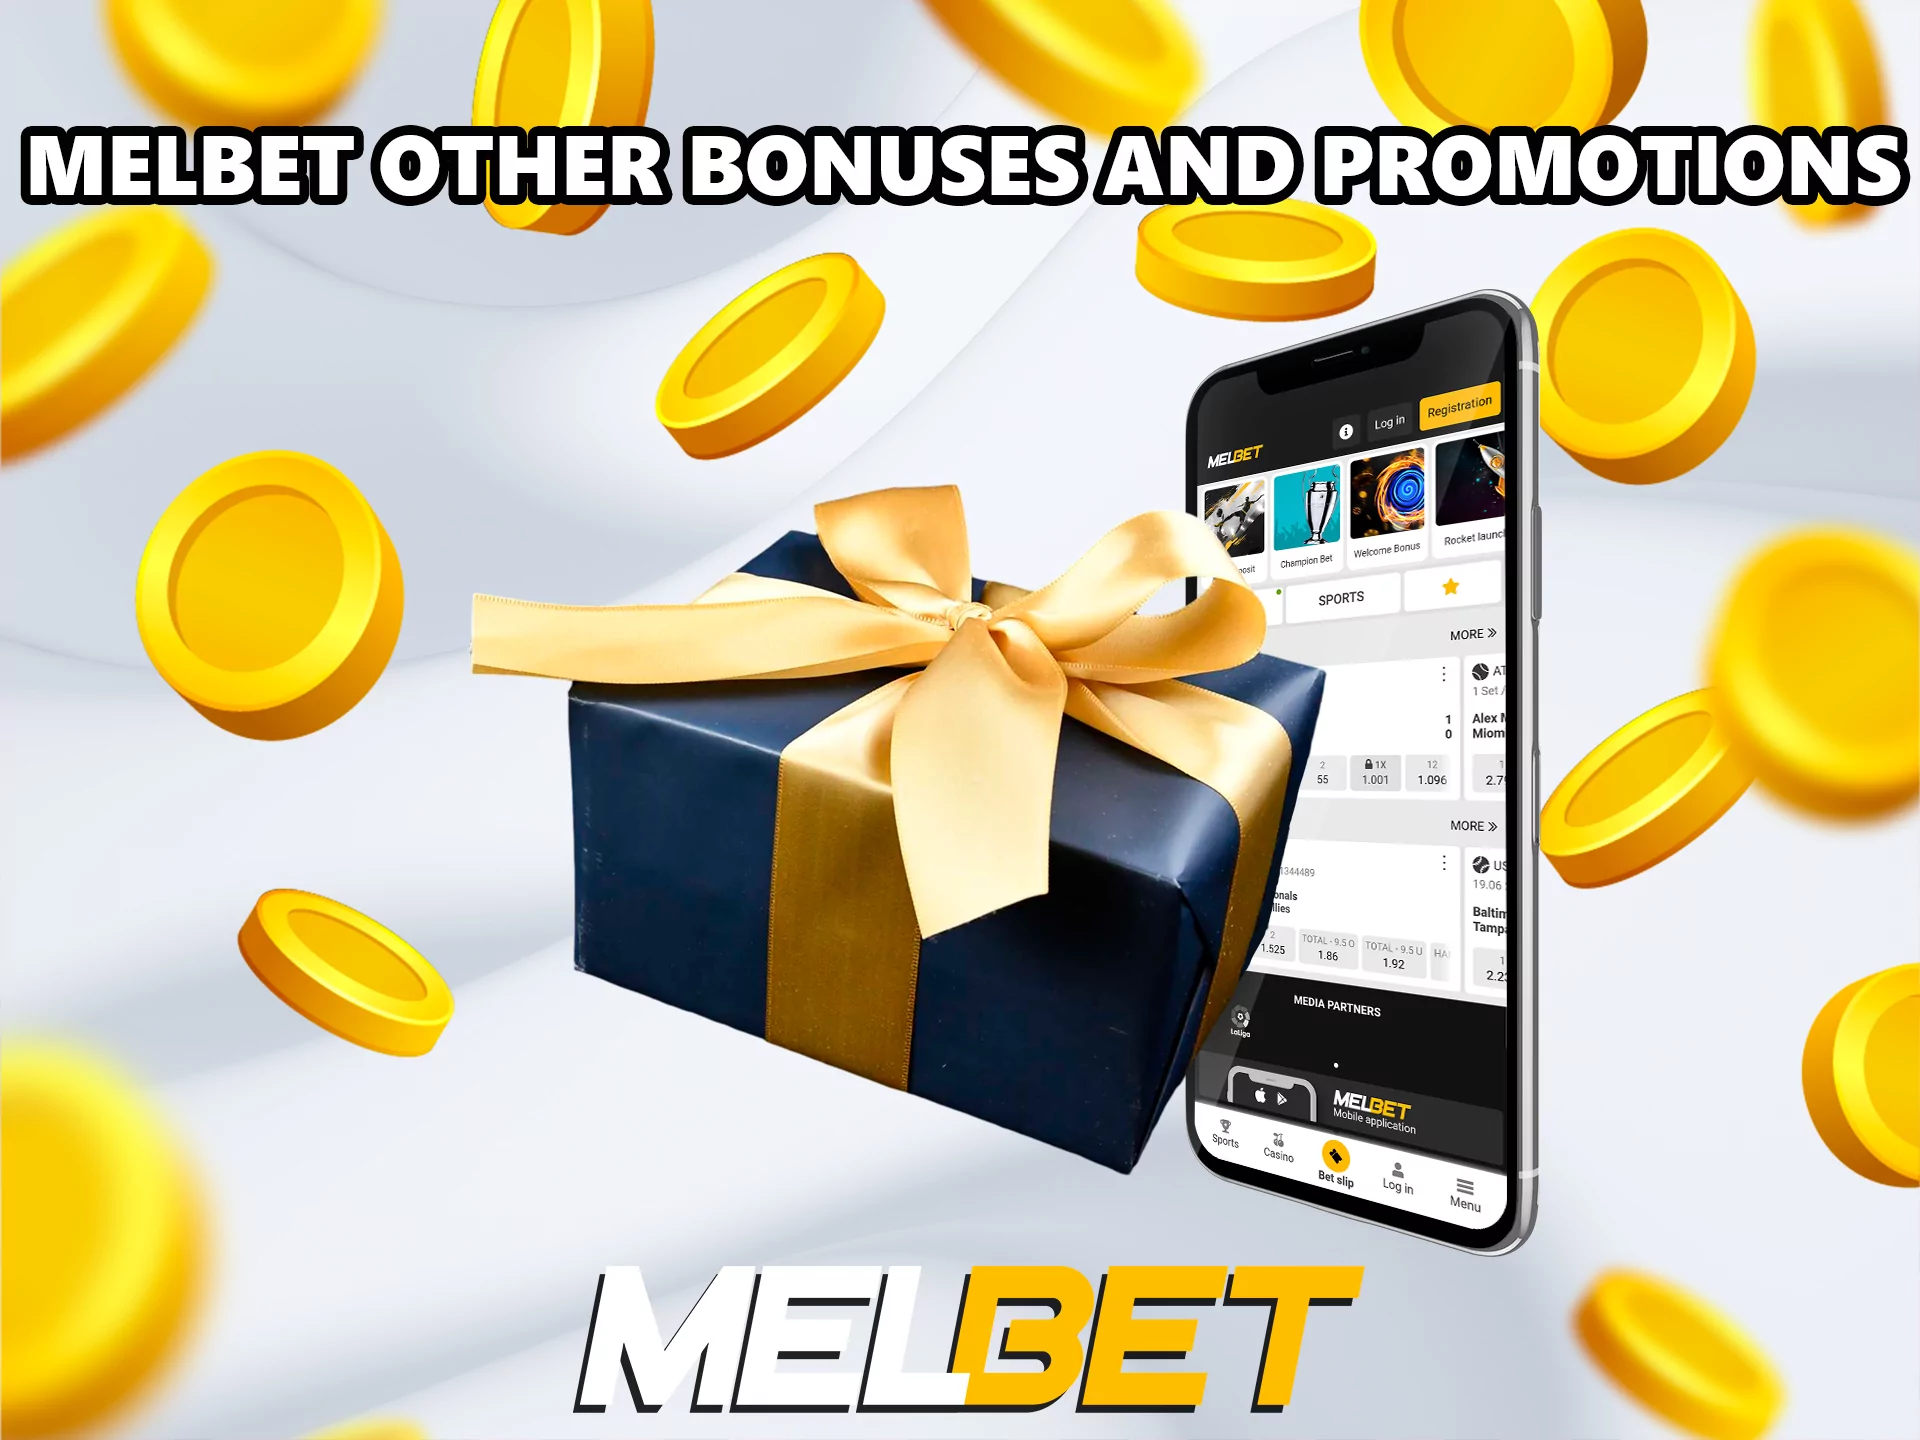 The company has many bonus and promotional offers, learn more about them in our article.